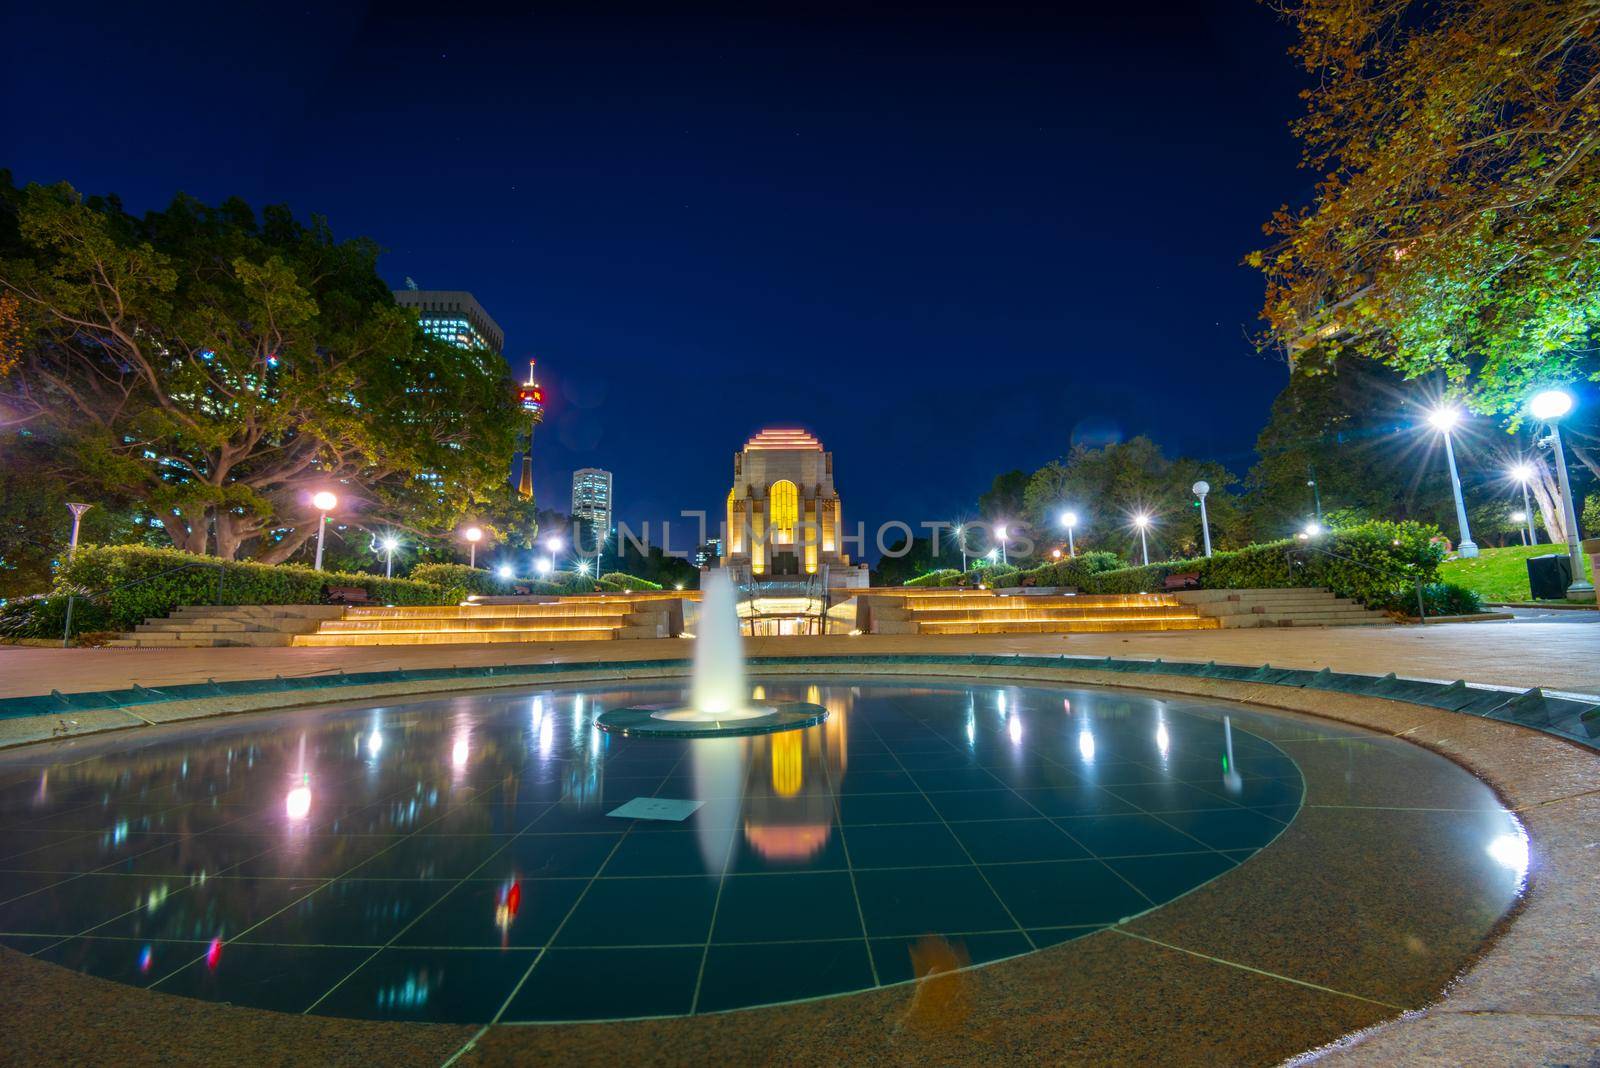 The Anzac Memorial was dedicated in 1934 In 1984, it was rededicated to honor all Australians serving their country in war